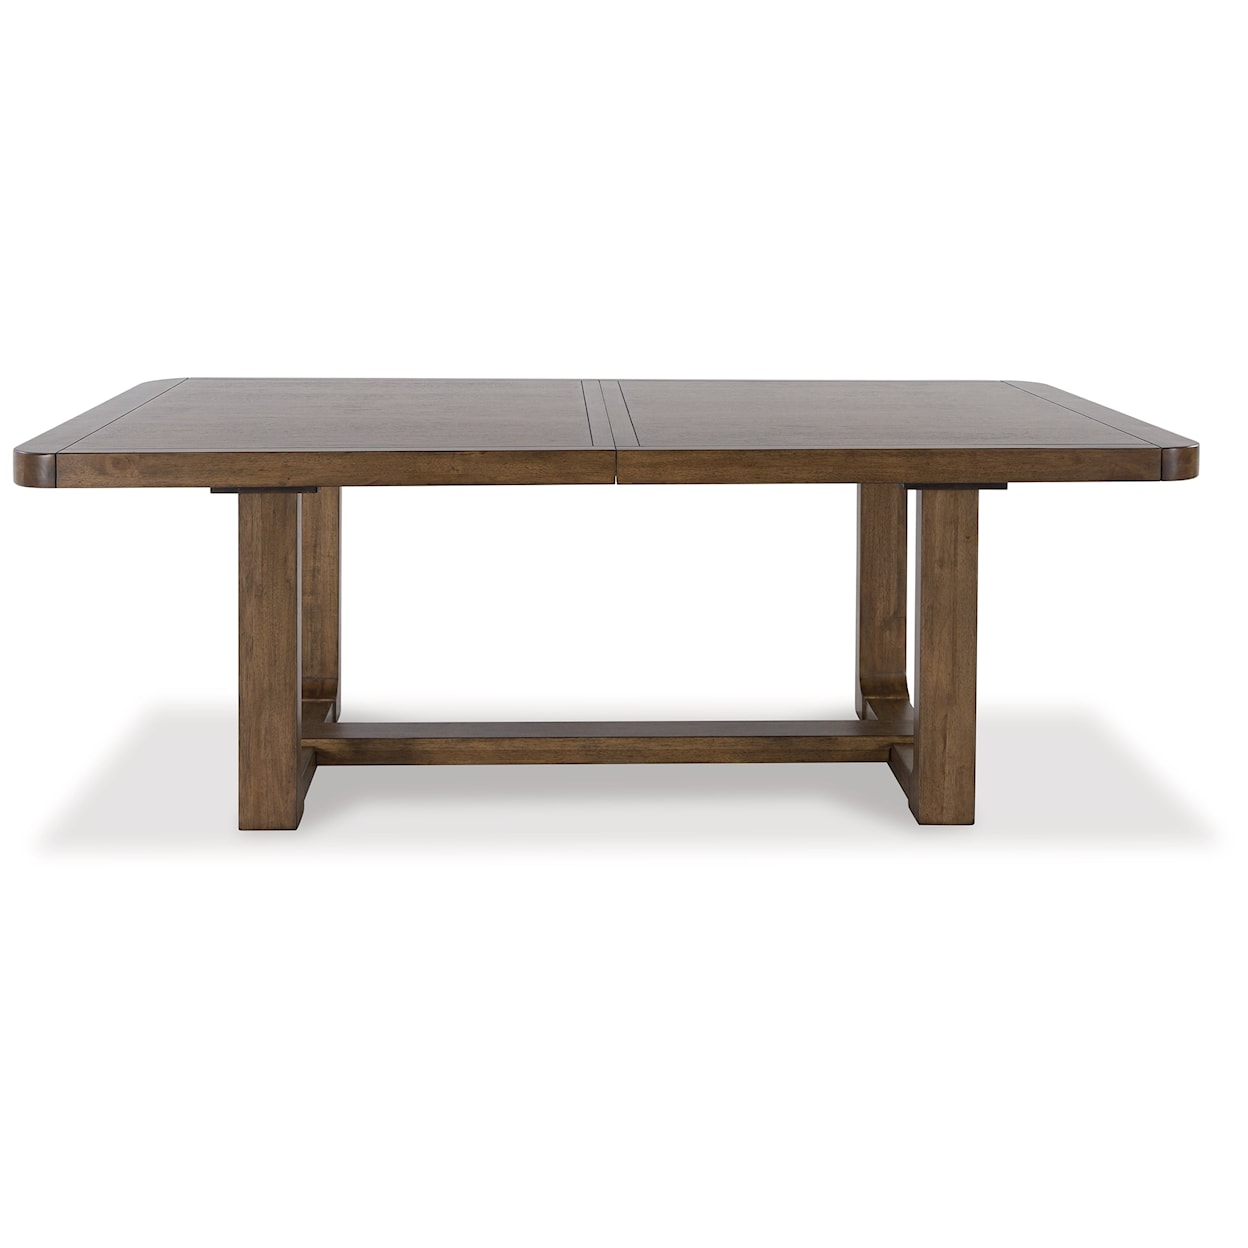 Signature Design by Ashley Cabalynn Dining Table